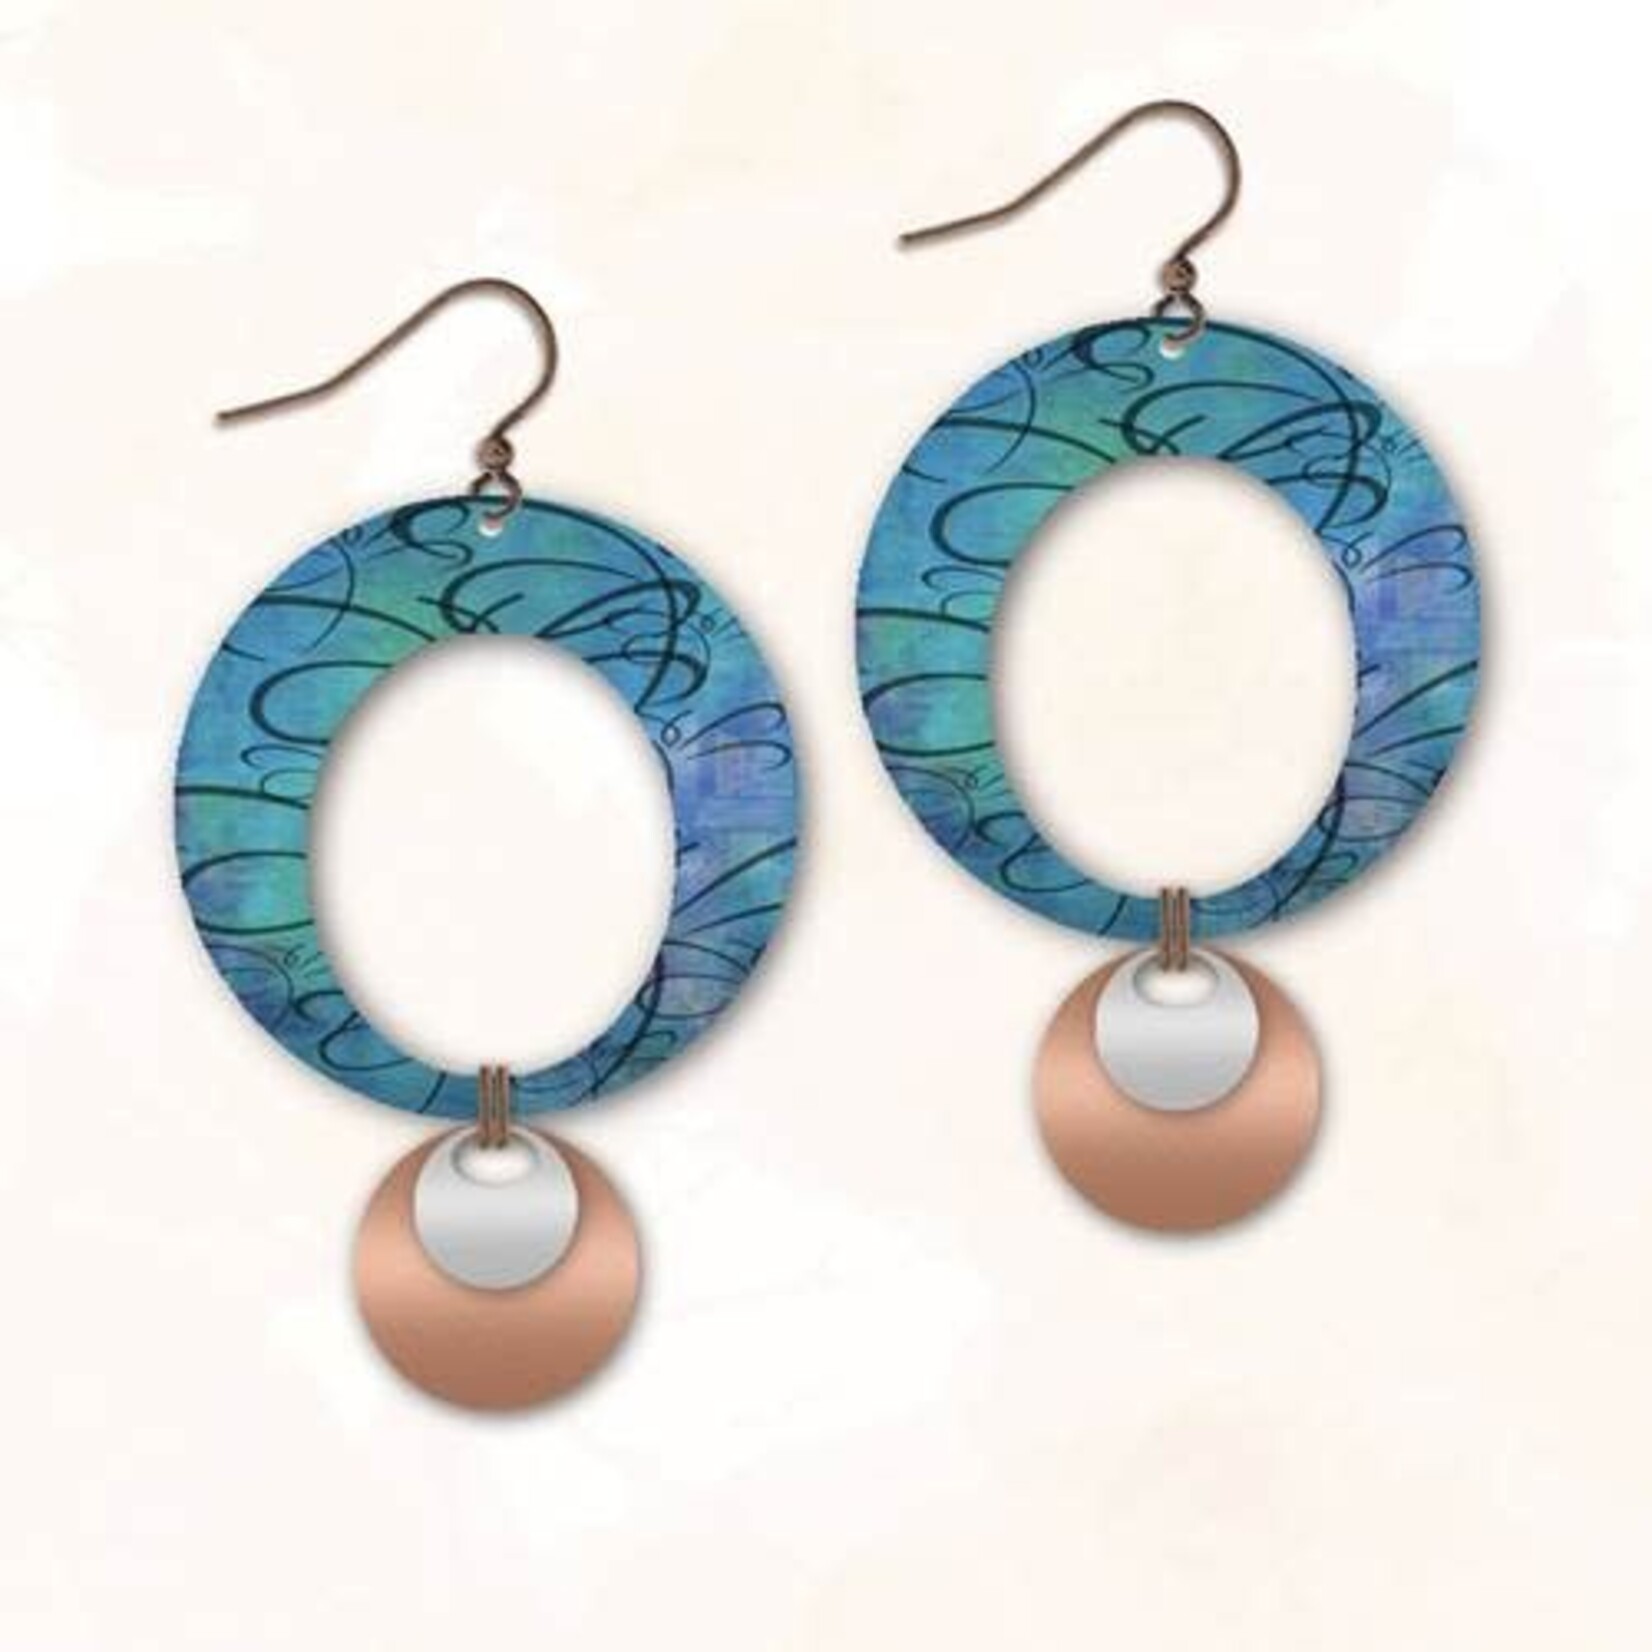 Illustrated Light - Colorado Photographic 1CBC - Earrings